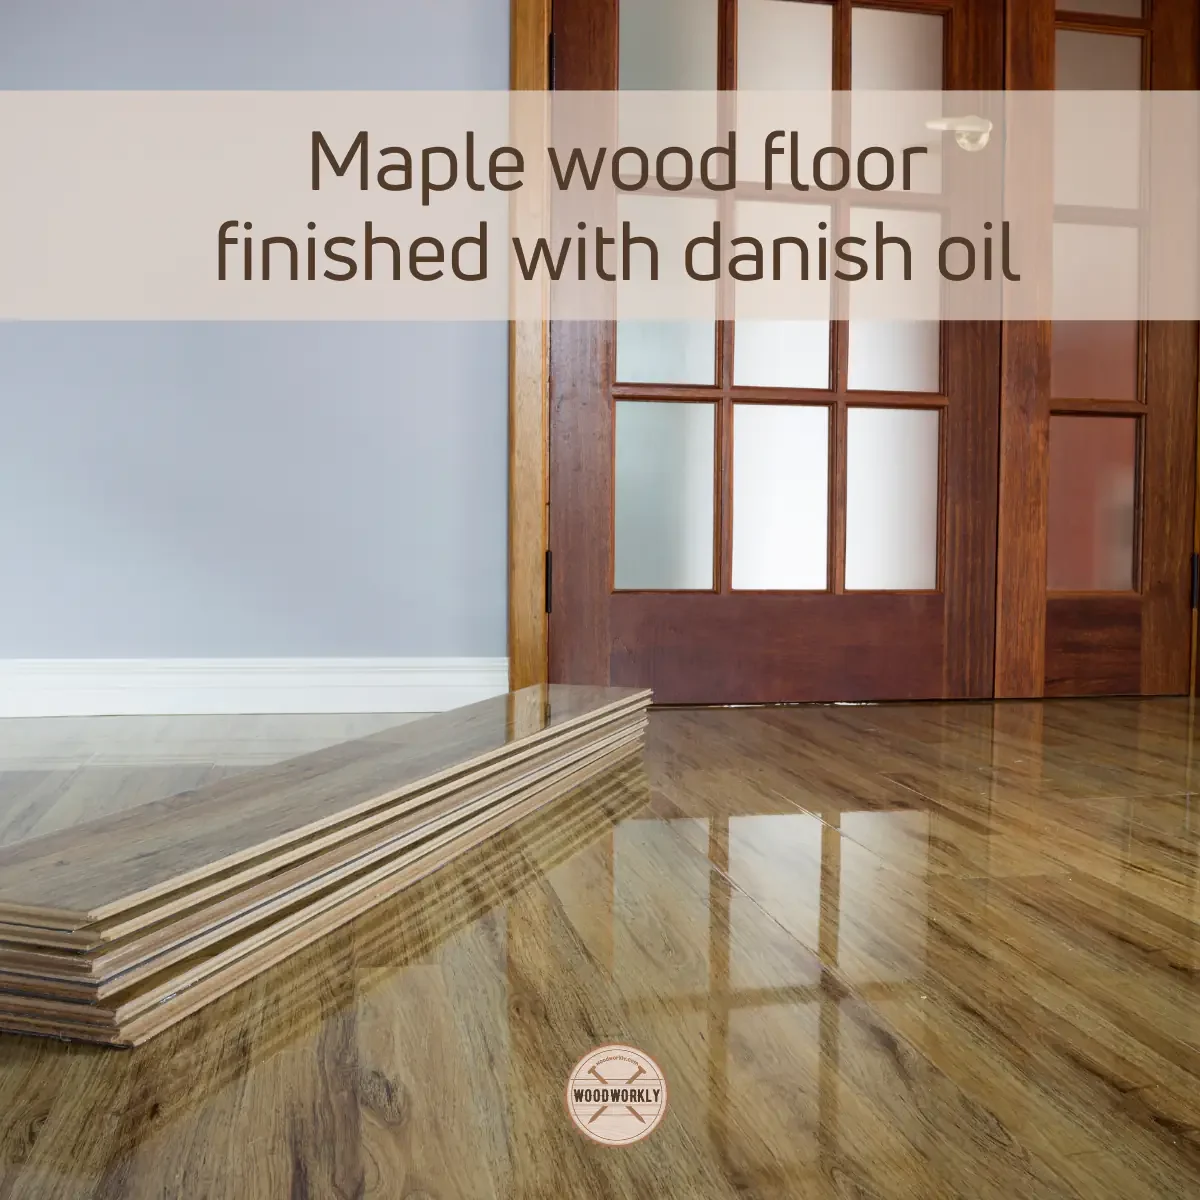 Maple wood floor finished with Danish oil